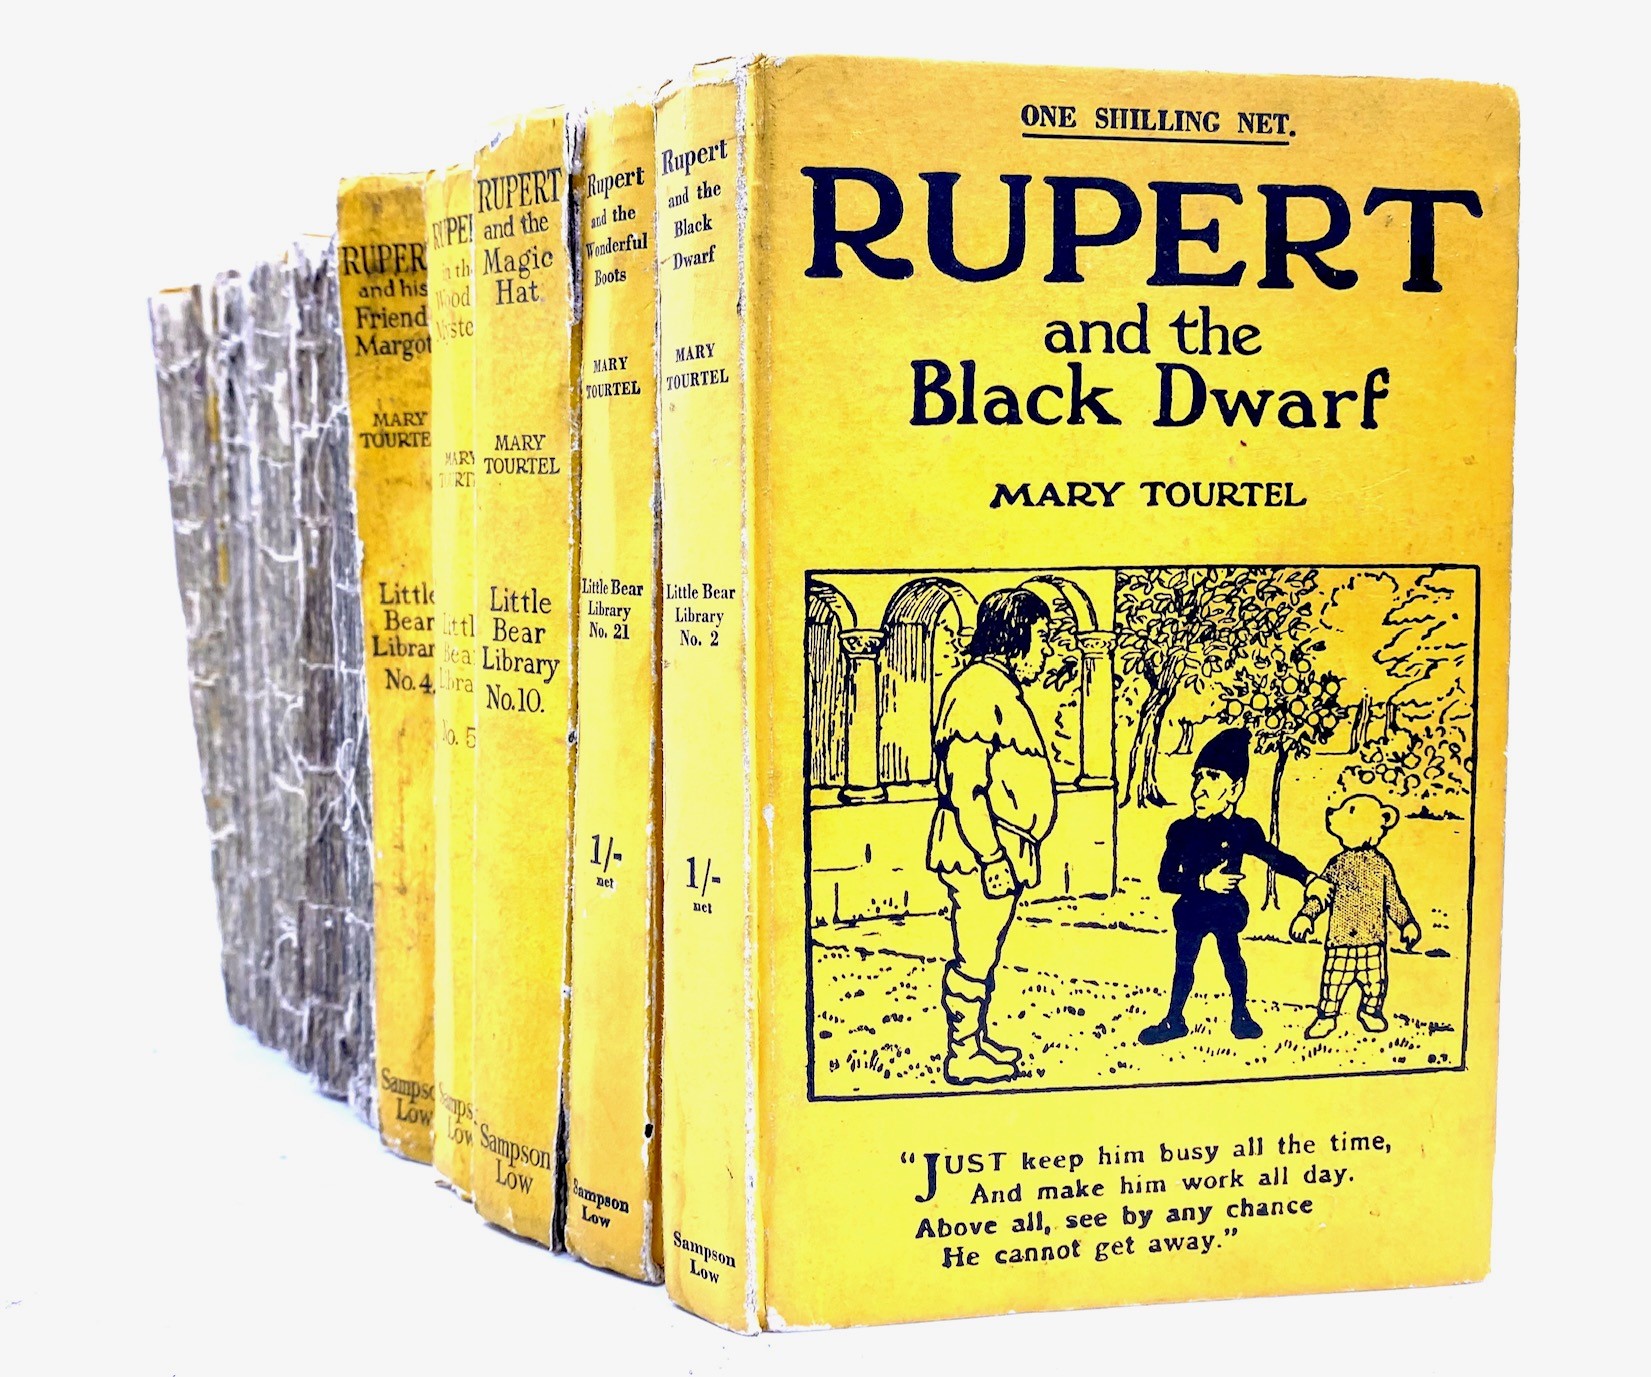 TOURTEL, Mary. A collection of ten books from the Rupert Little Bear Library series in distinctive